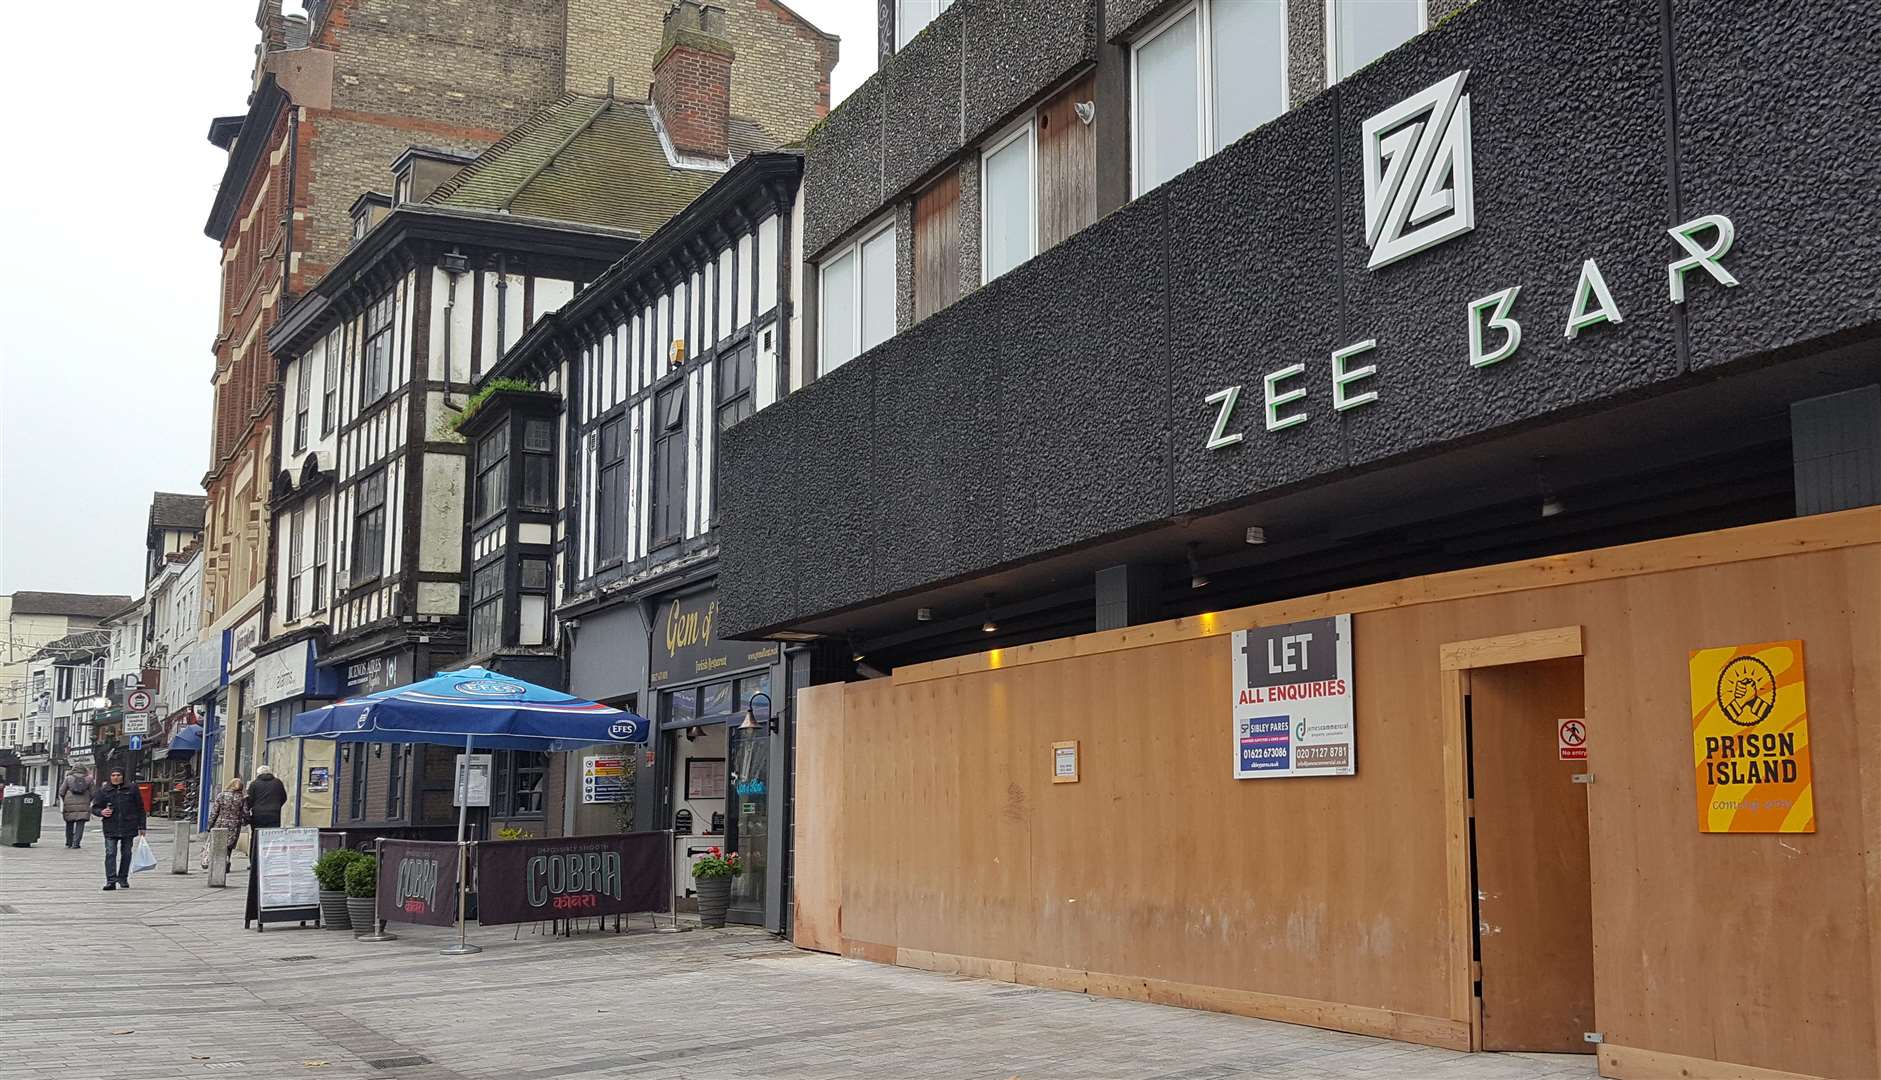 The new escape room, Prison Island, is to open at the site of the Zee Bar in Maidstone